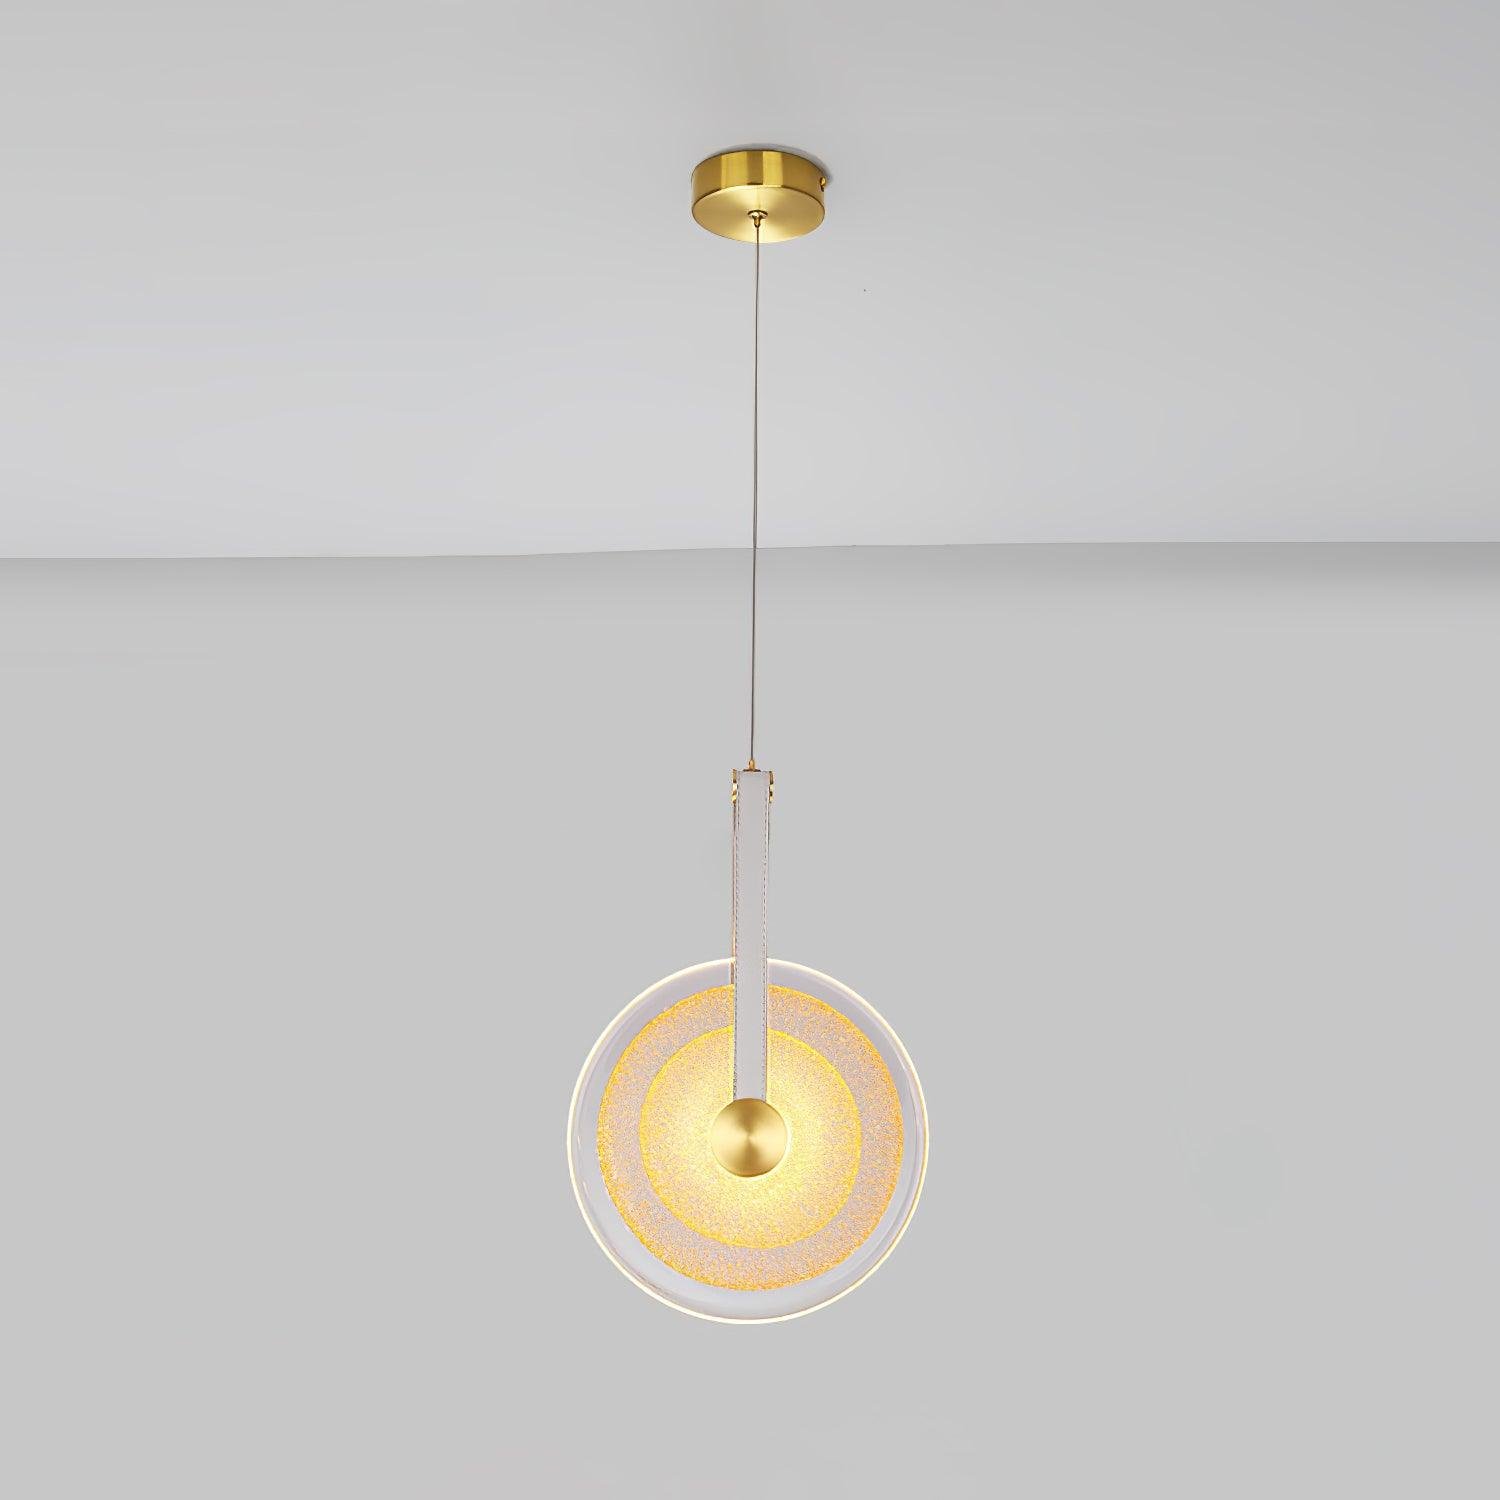 Paolo Castelli Pendant Lamp in Gold and Clear, with Cool Light, measuring Ø 7.9″ x H 8.7″ (20cm x 36cm)